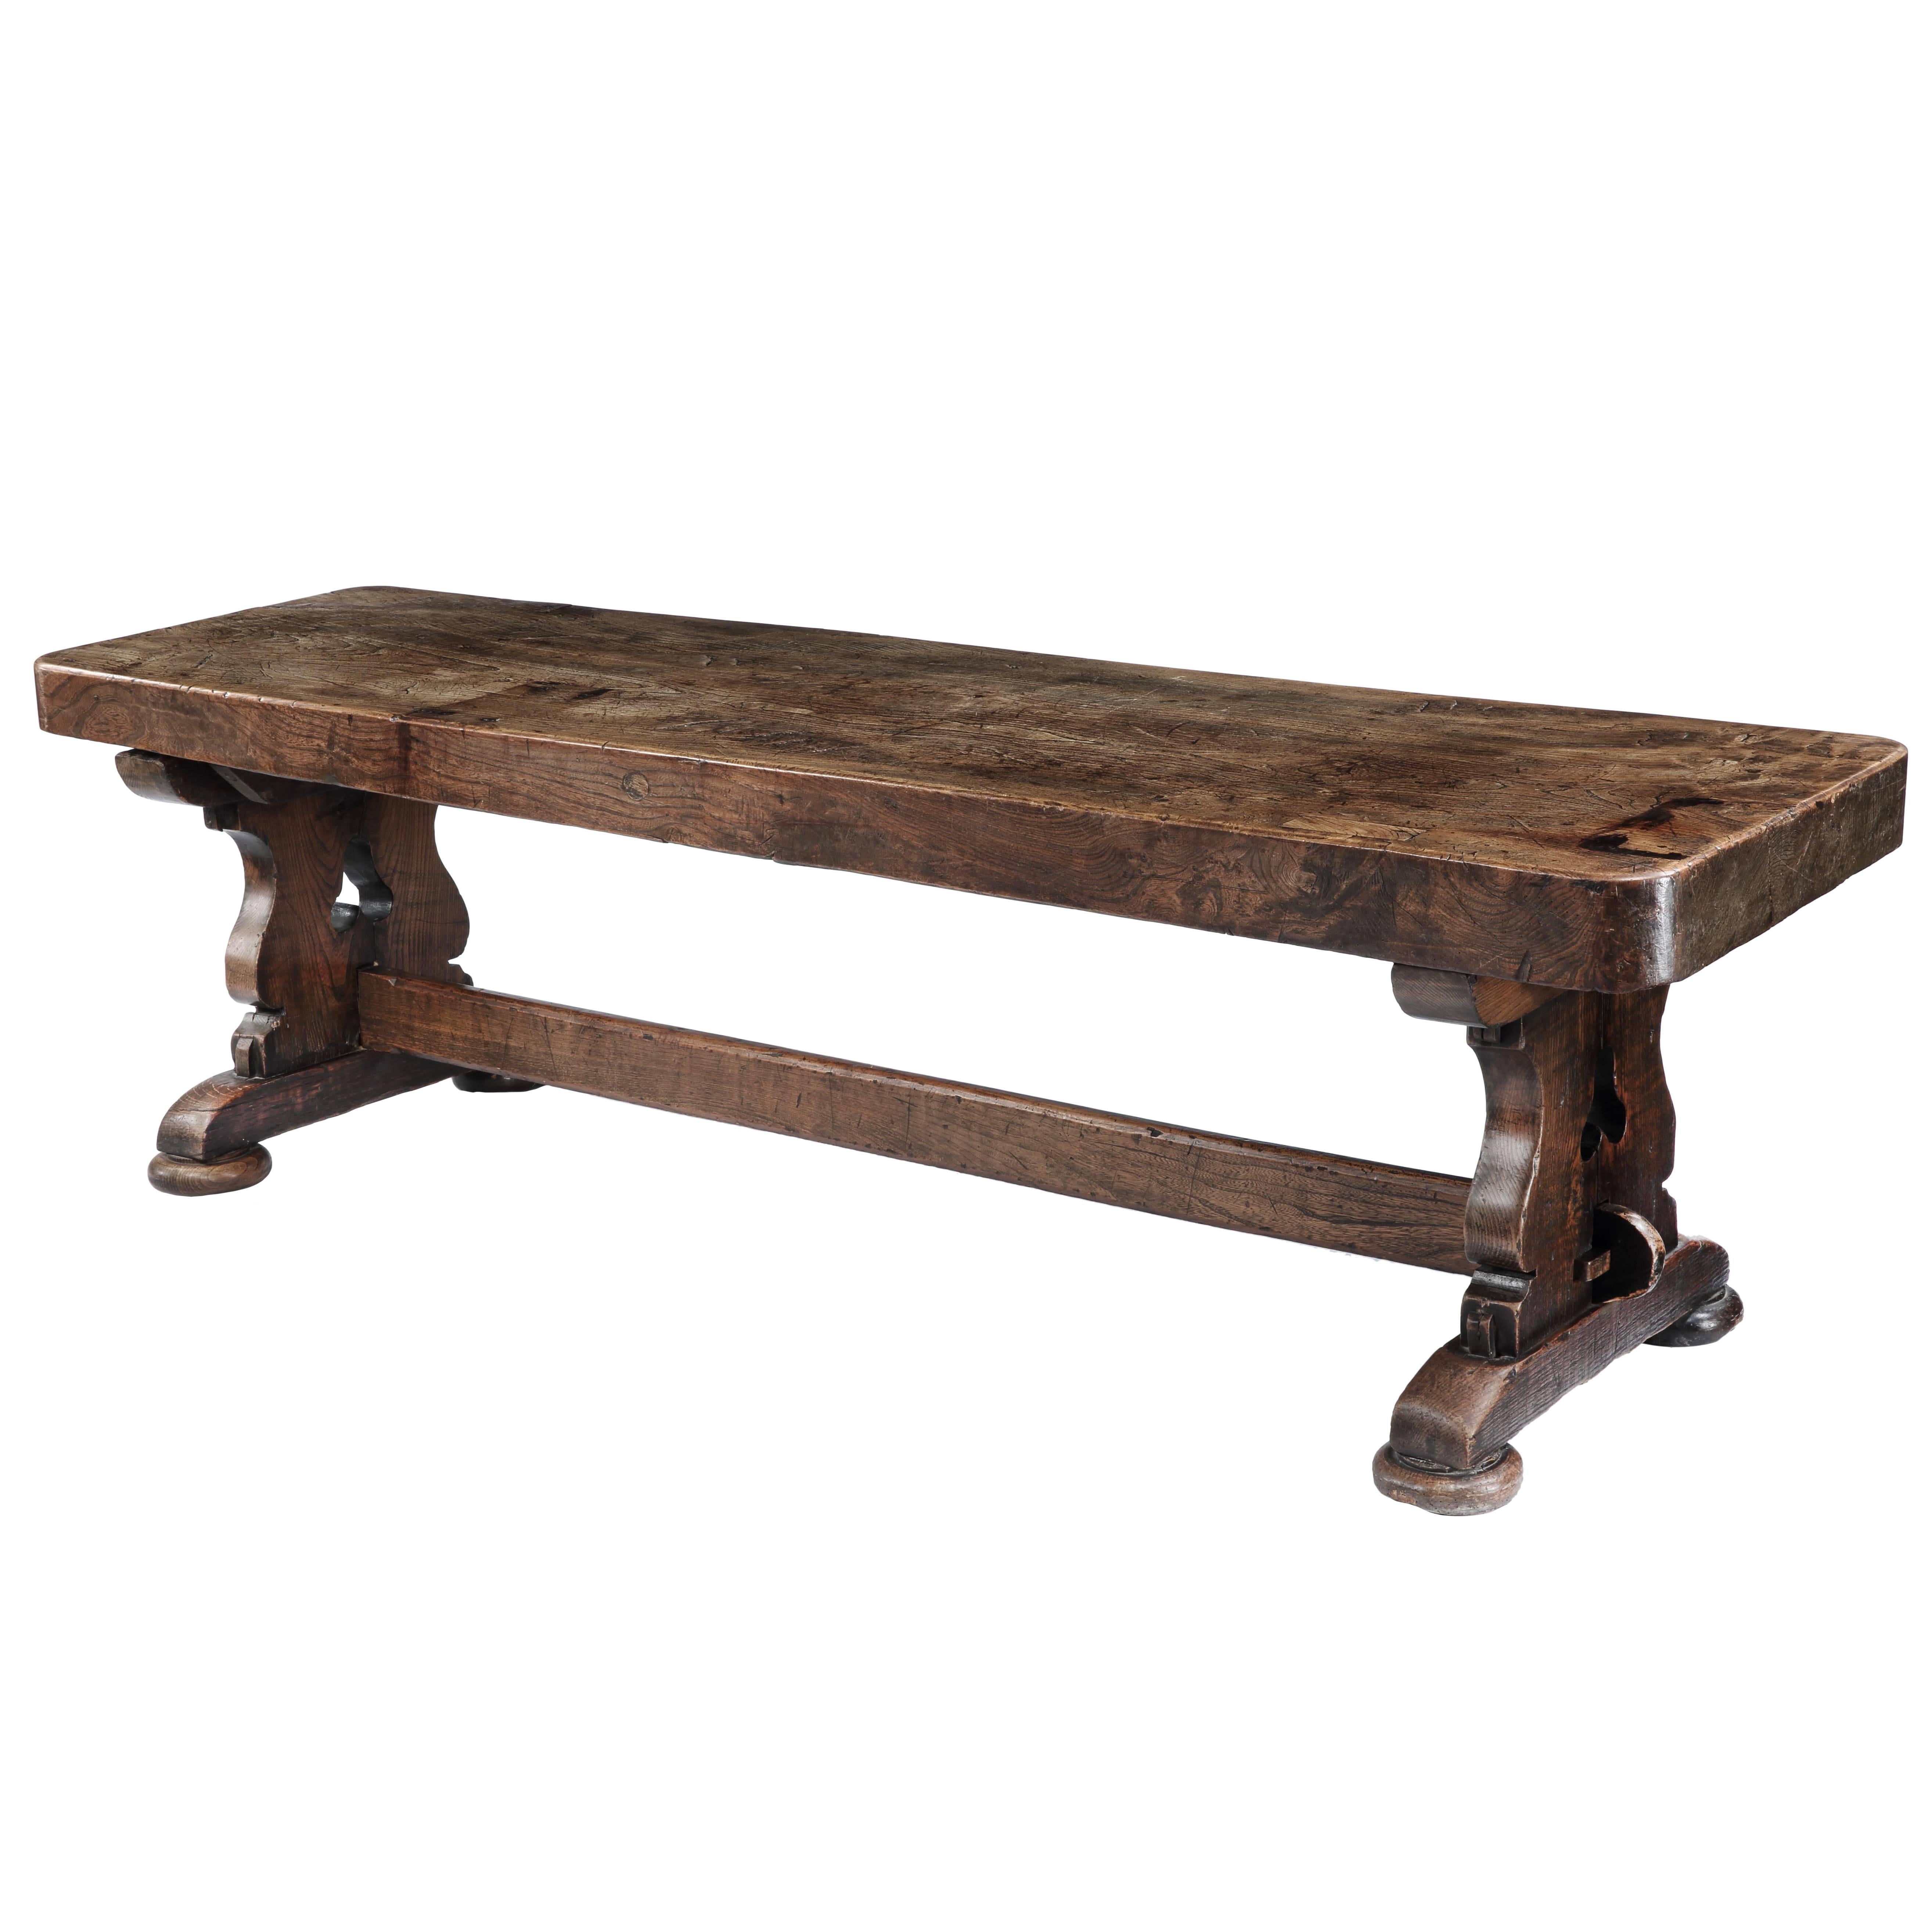 Gothic Revival Elm Refectory Table For Sale